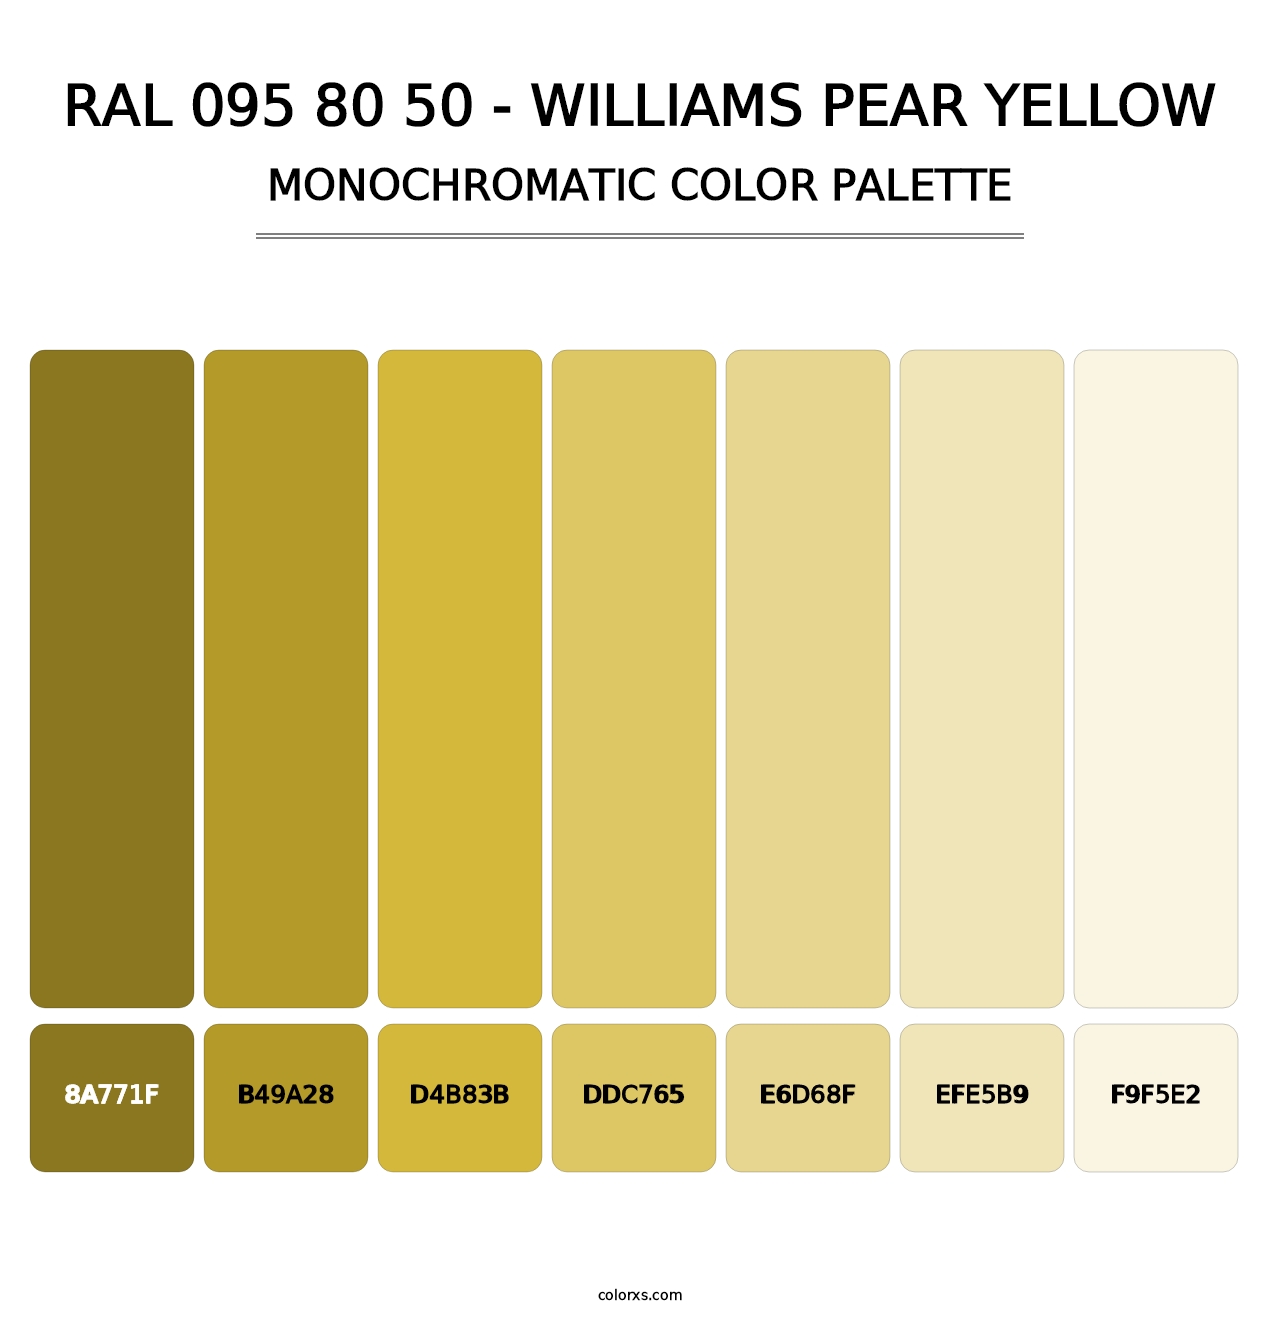 RAL 095 80 50 - Williams Pear Yellow - Monochromatic Color Palette